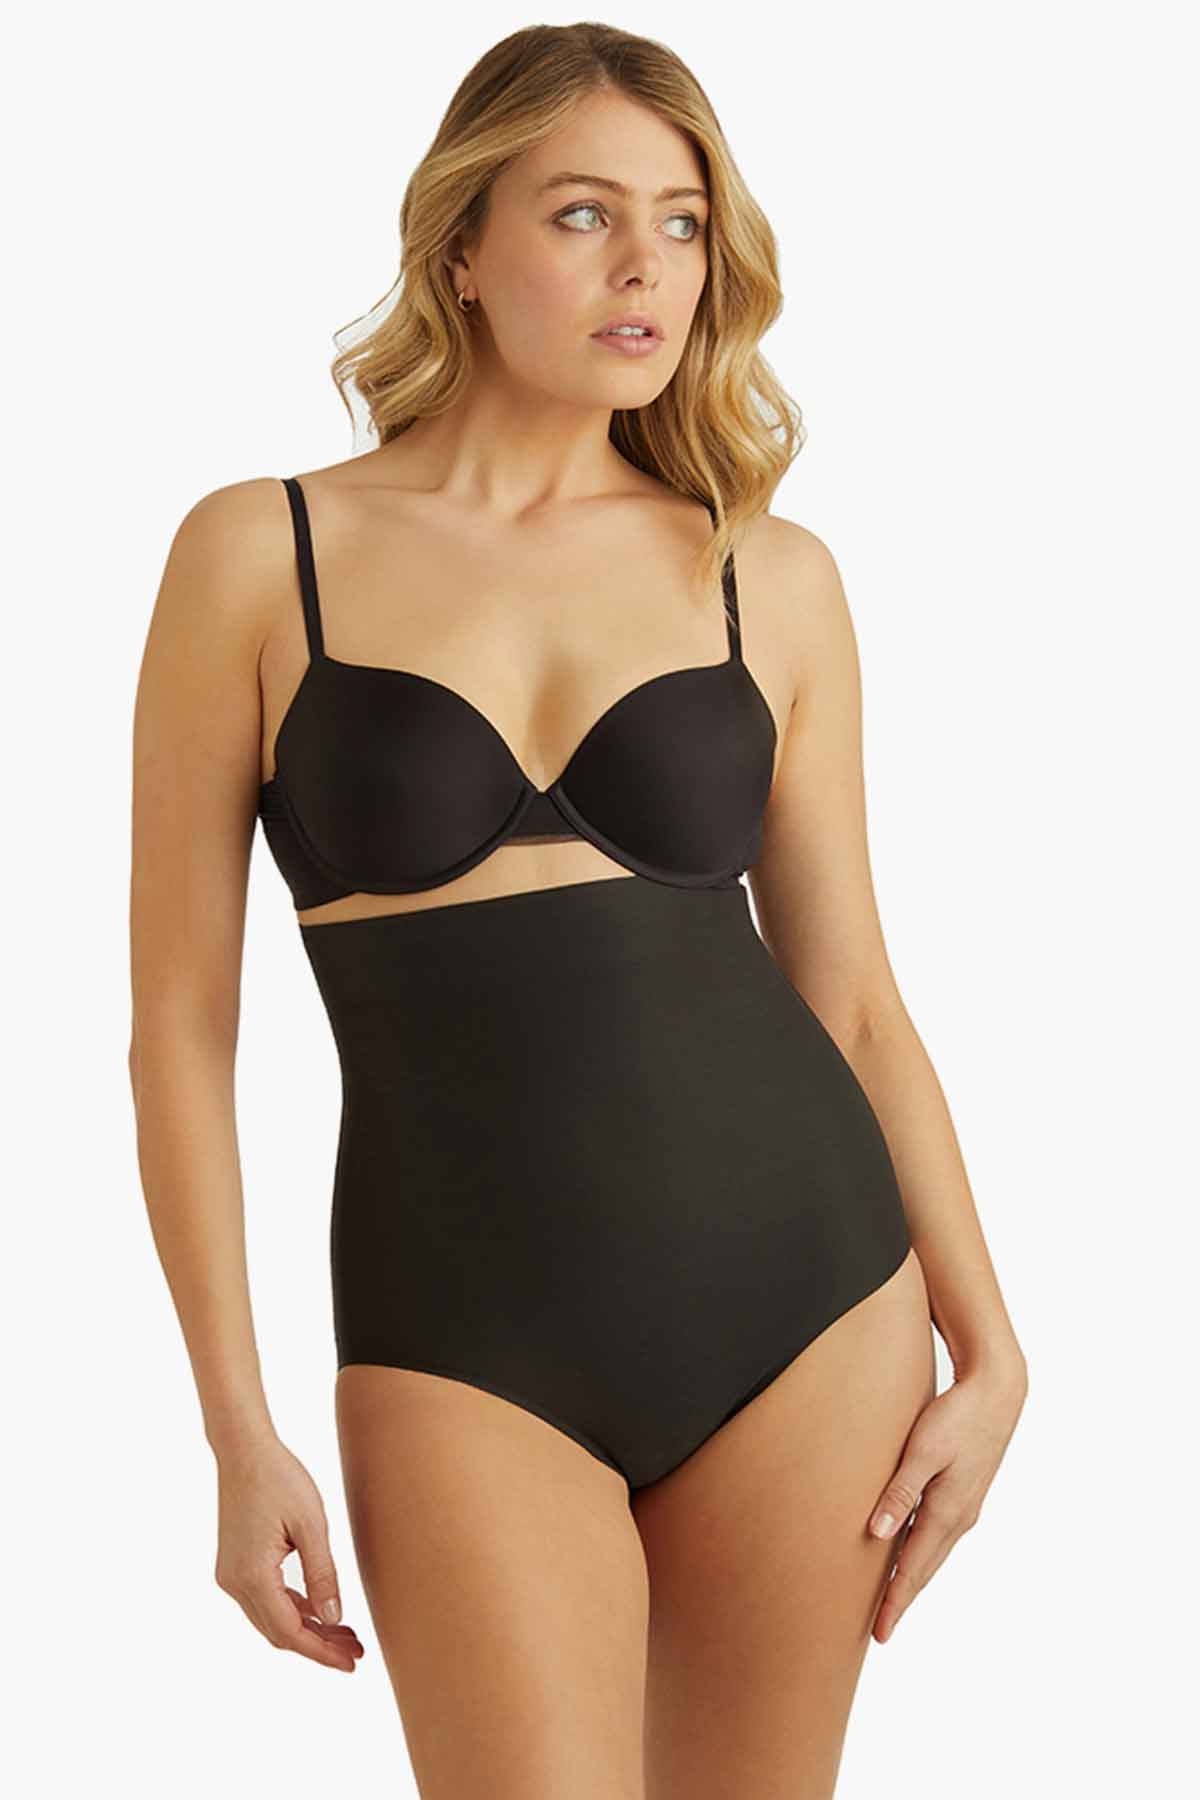 Miraclesuit Tummy Tuck Firm Control Thigh Slimmer, XL, Black : Buy Online  at Best Price in KSA - Souq is now : Fashion